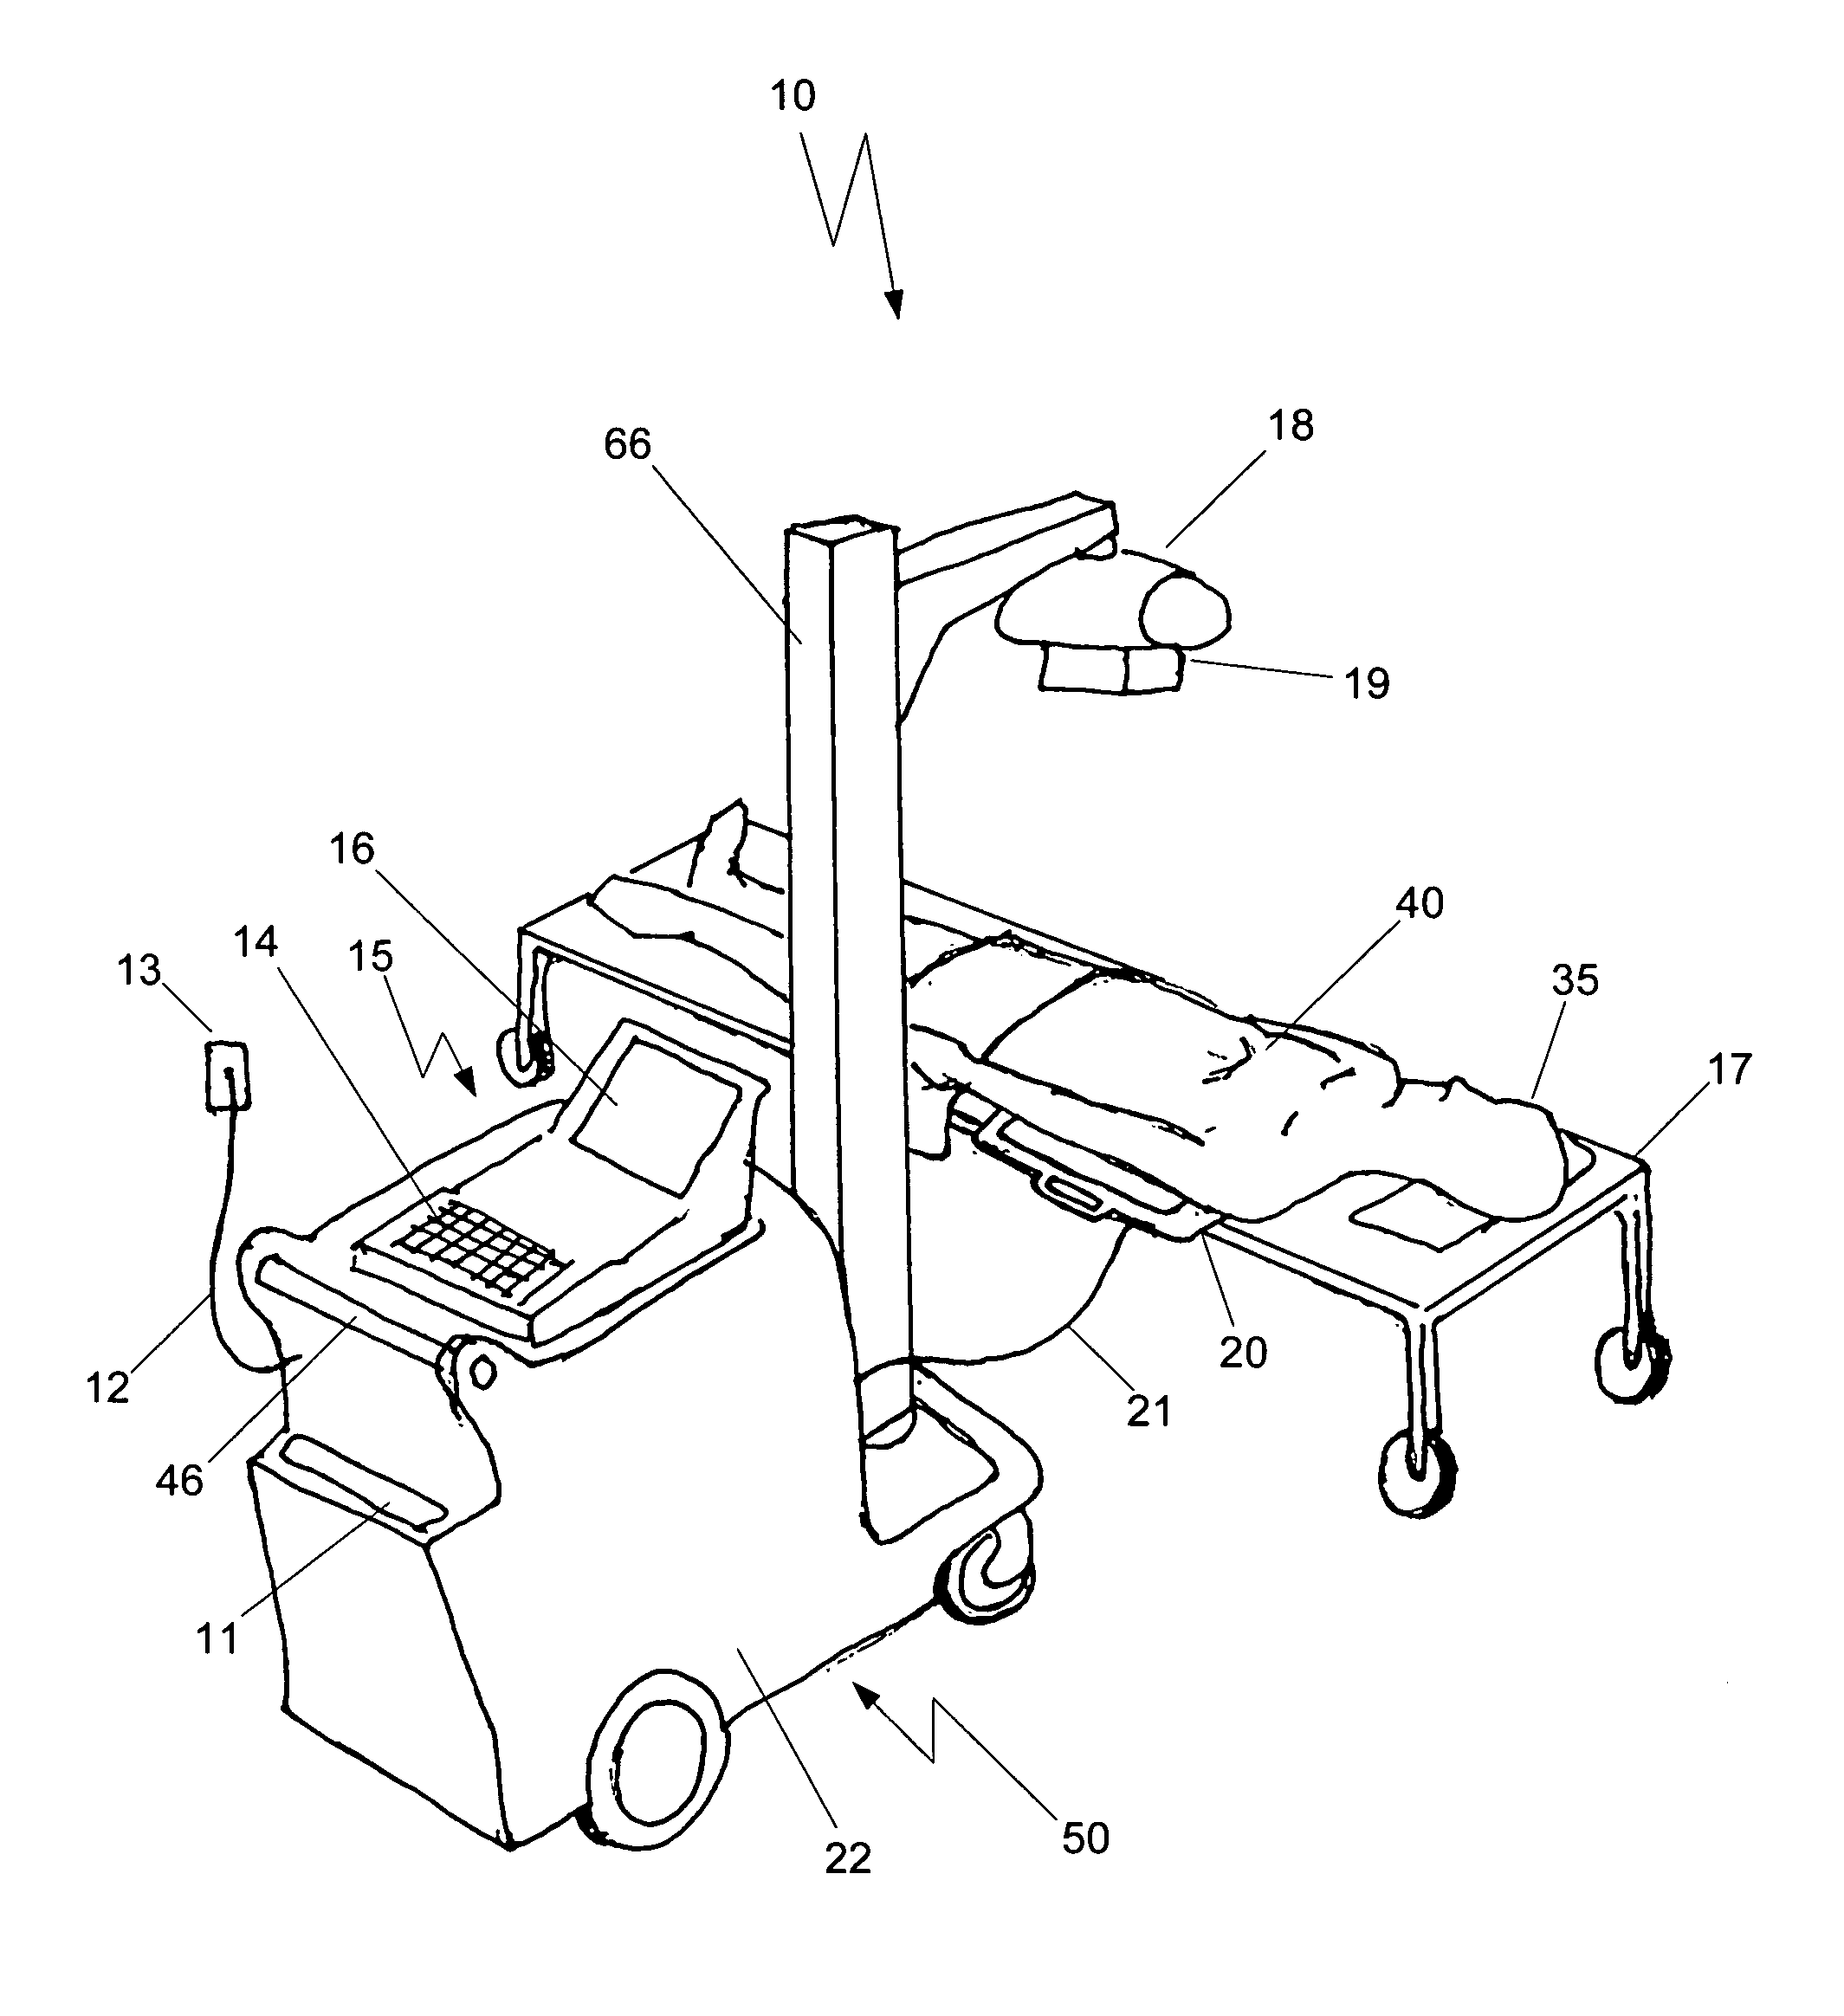 Mobile digital radiography x-ray apparatus and system